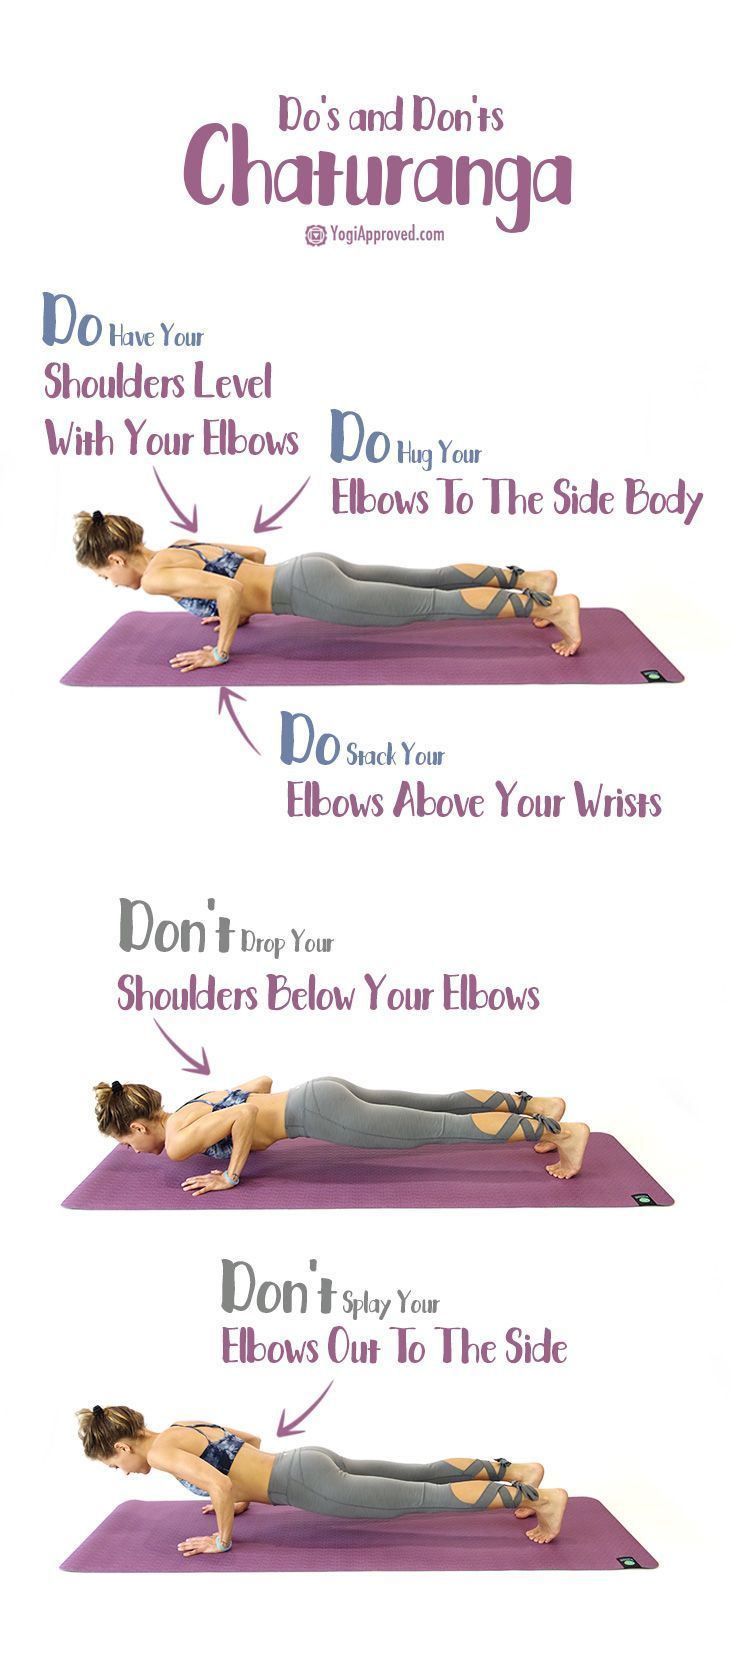 Here are 5 tips and a comprehensive breakdown on how to practice Chaturanga prop...